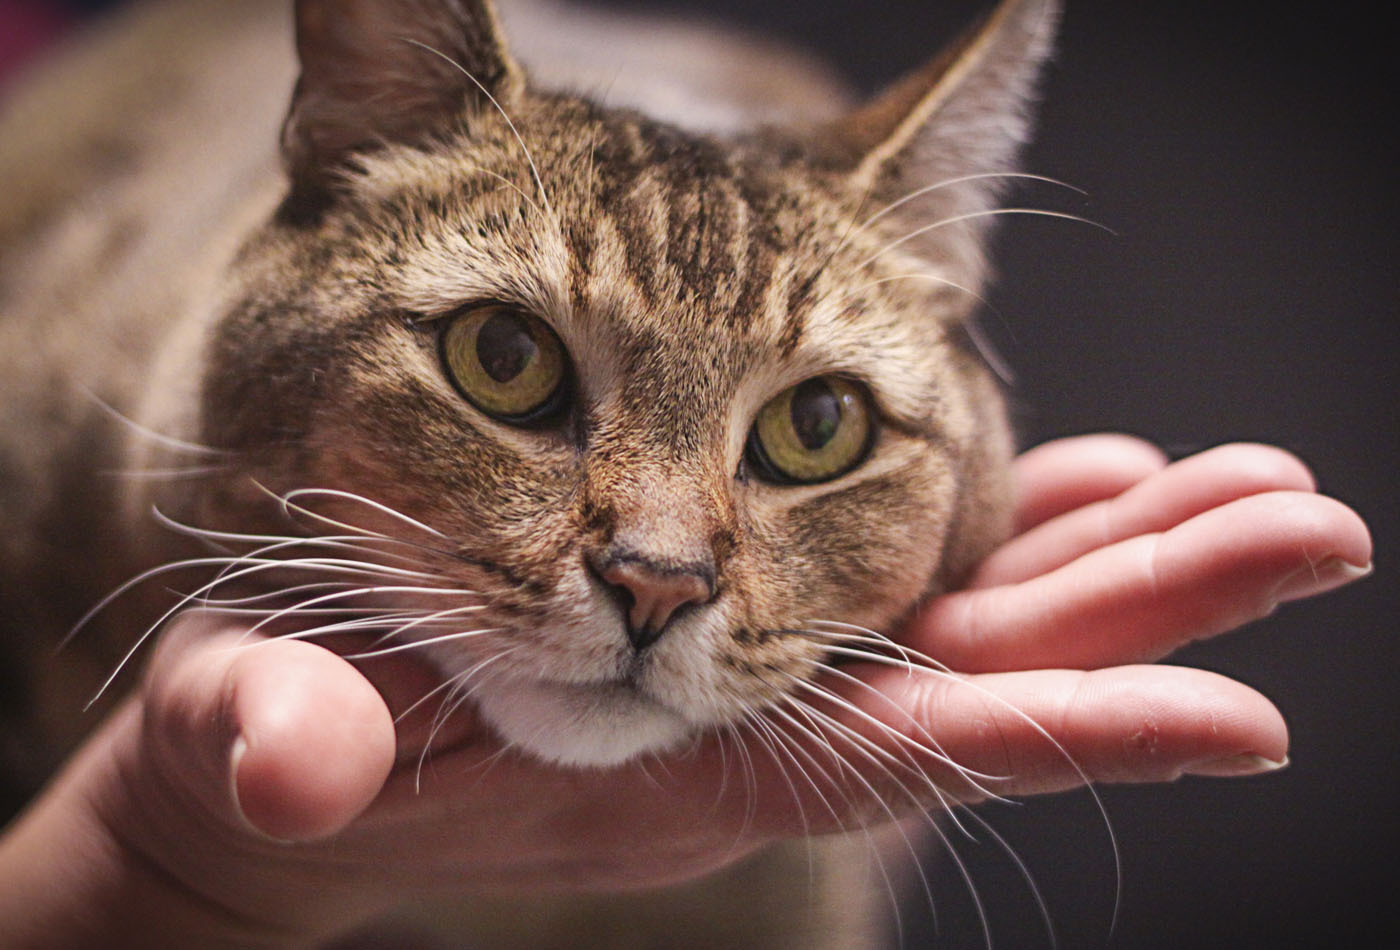 Image of a brown cat resting its head on a person's hand